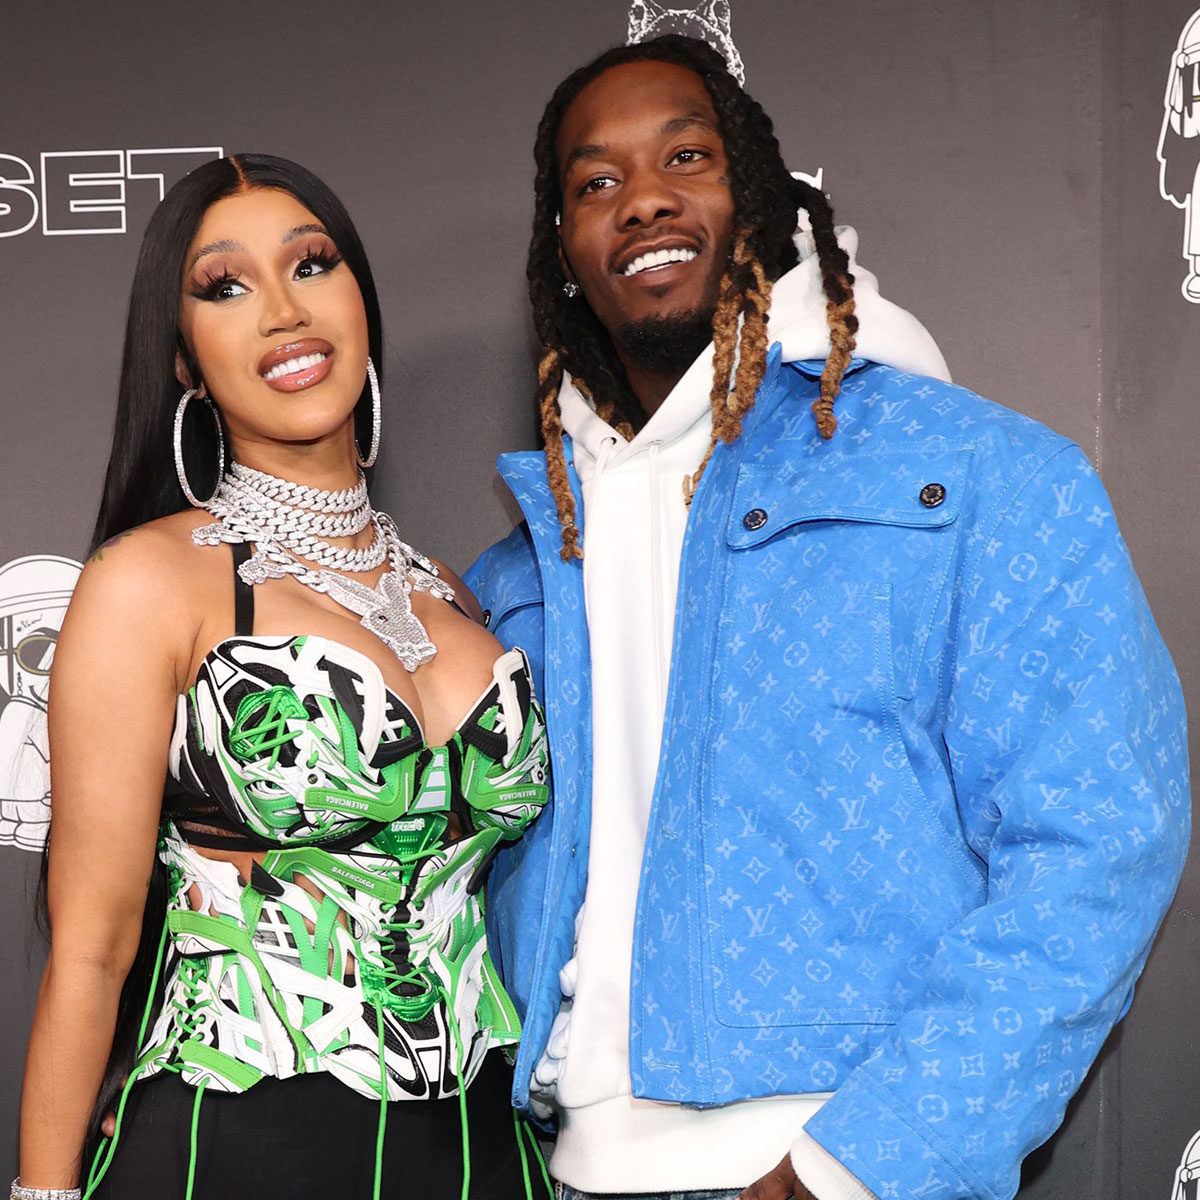 A Timeline of Cardi B and Offset’s On-Again, Off-Again Relationship